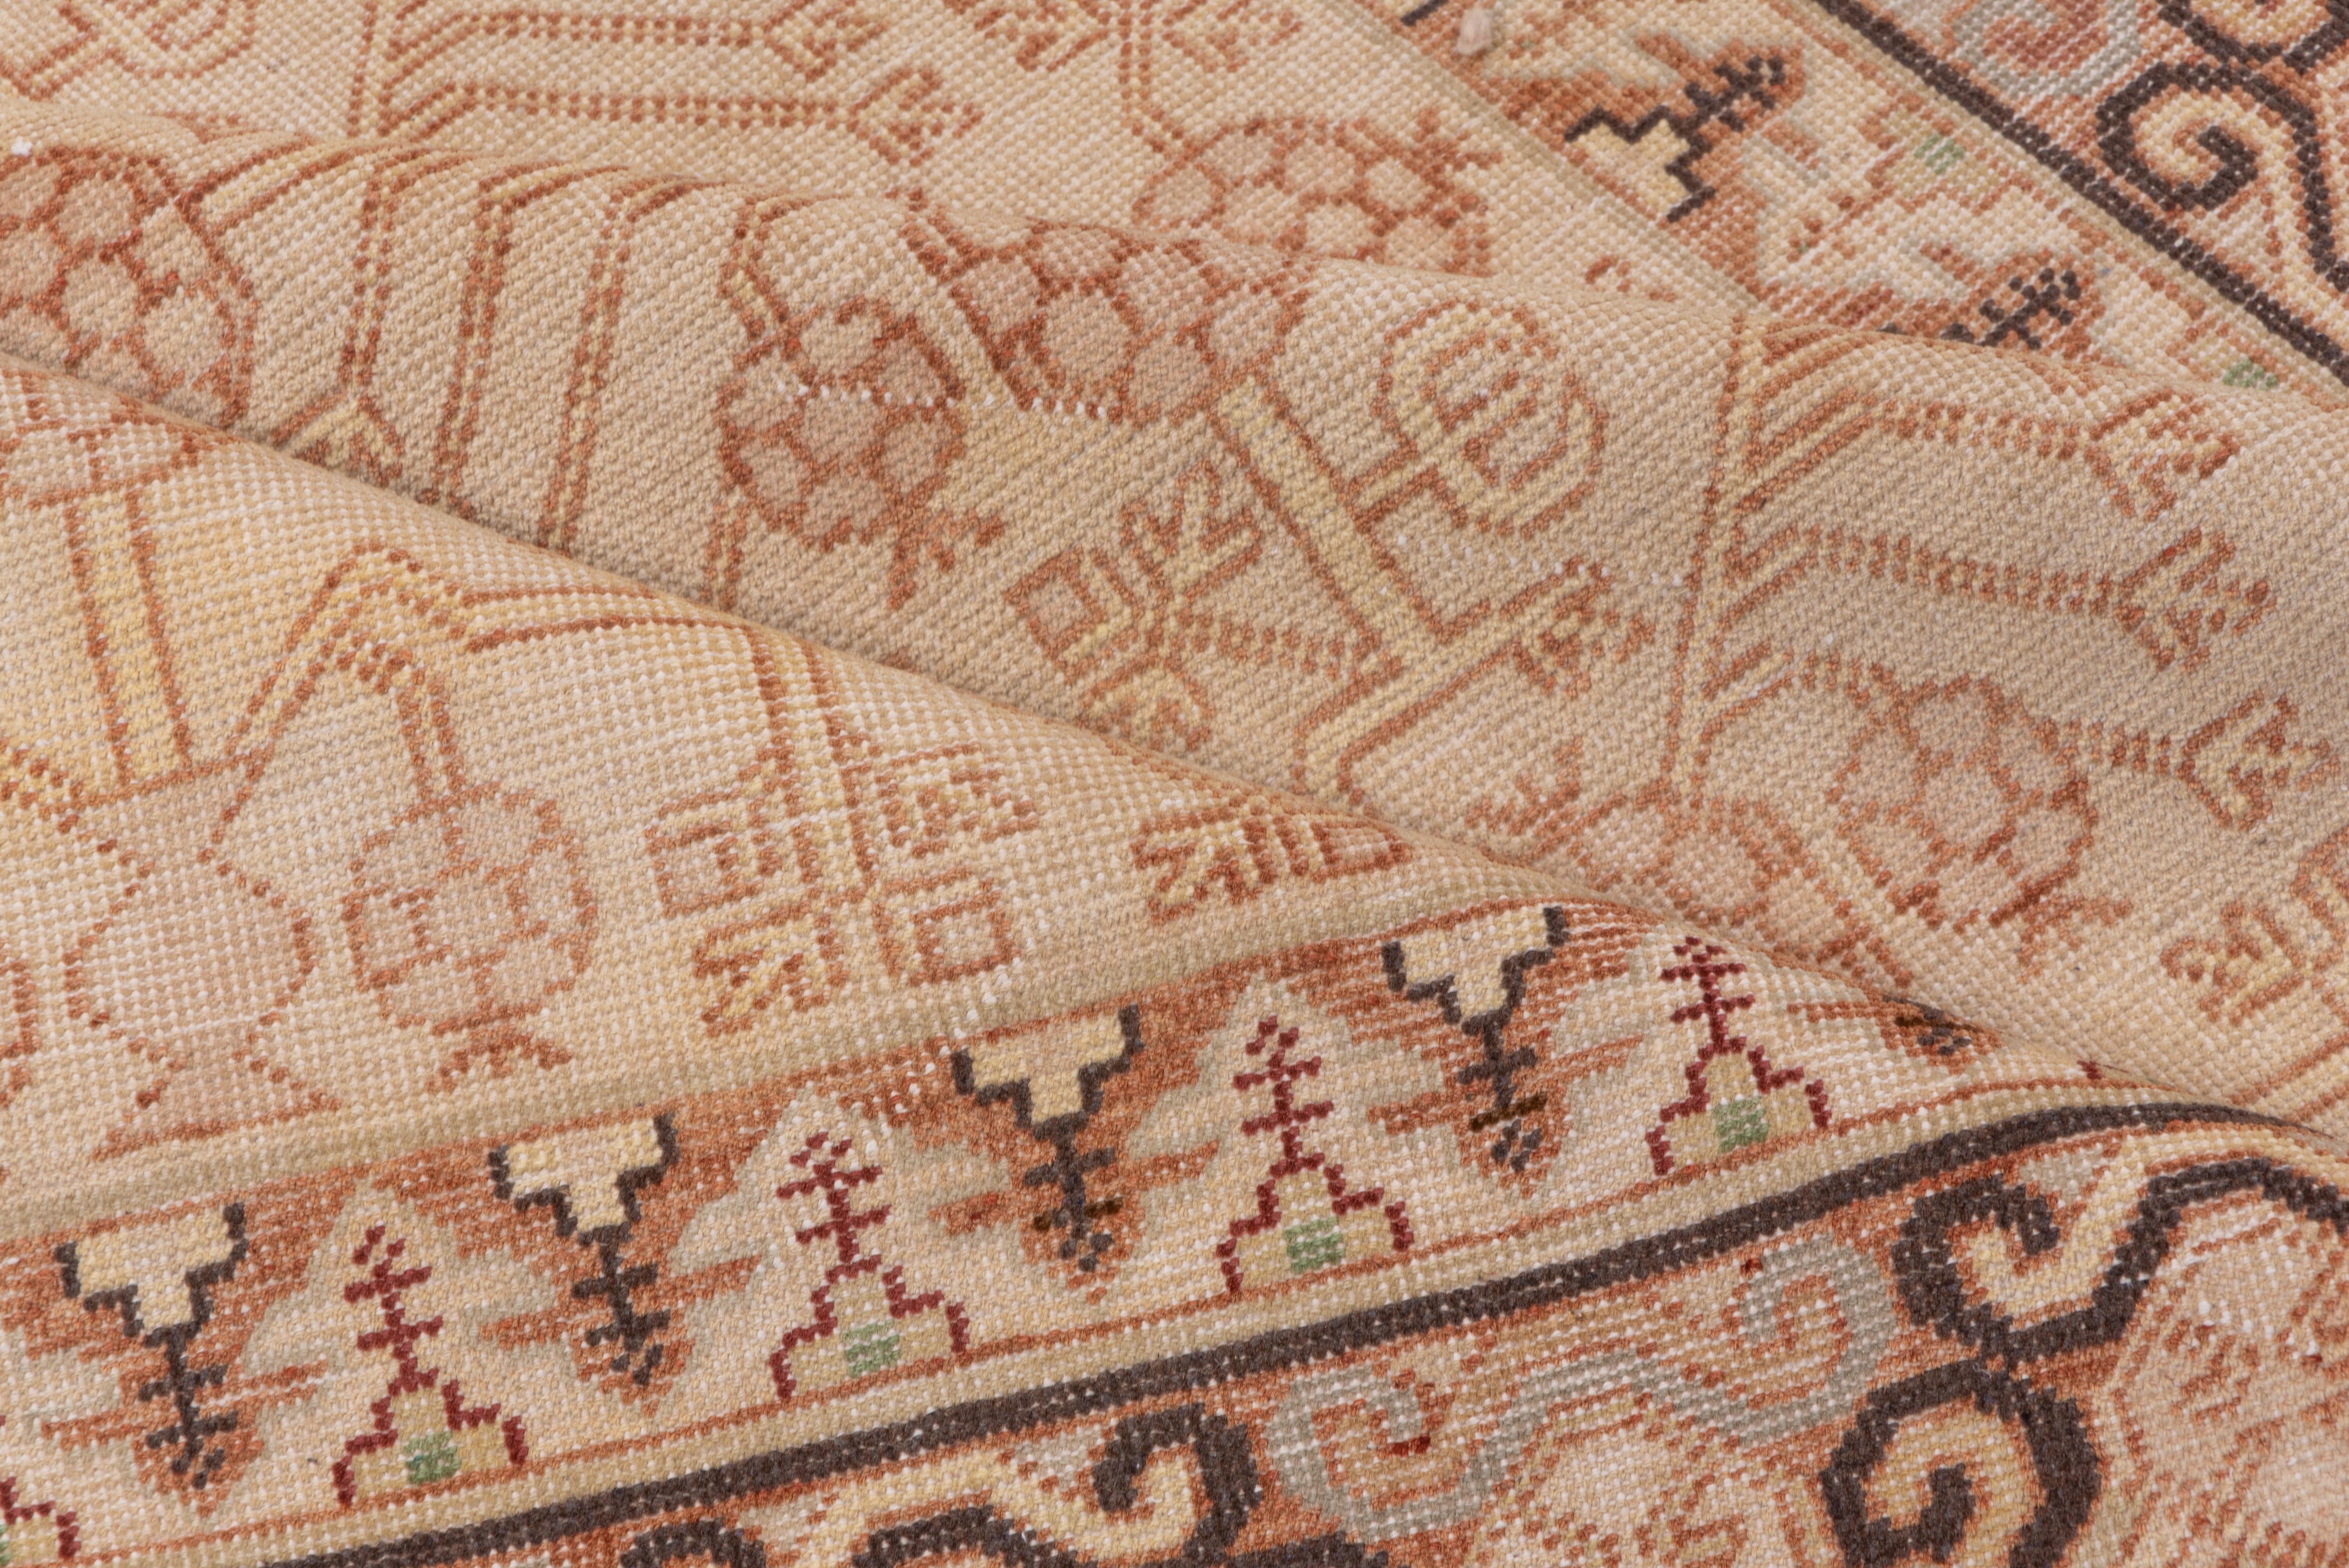 A two column stylized pomegranate tree design with tiny end vases fills the oatmeal field of this Xinjiang town rug with a dark brown - accented partial Yun-tsao Tou border. Pink tones, neutral field.